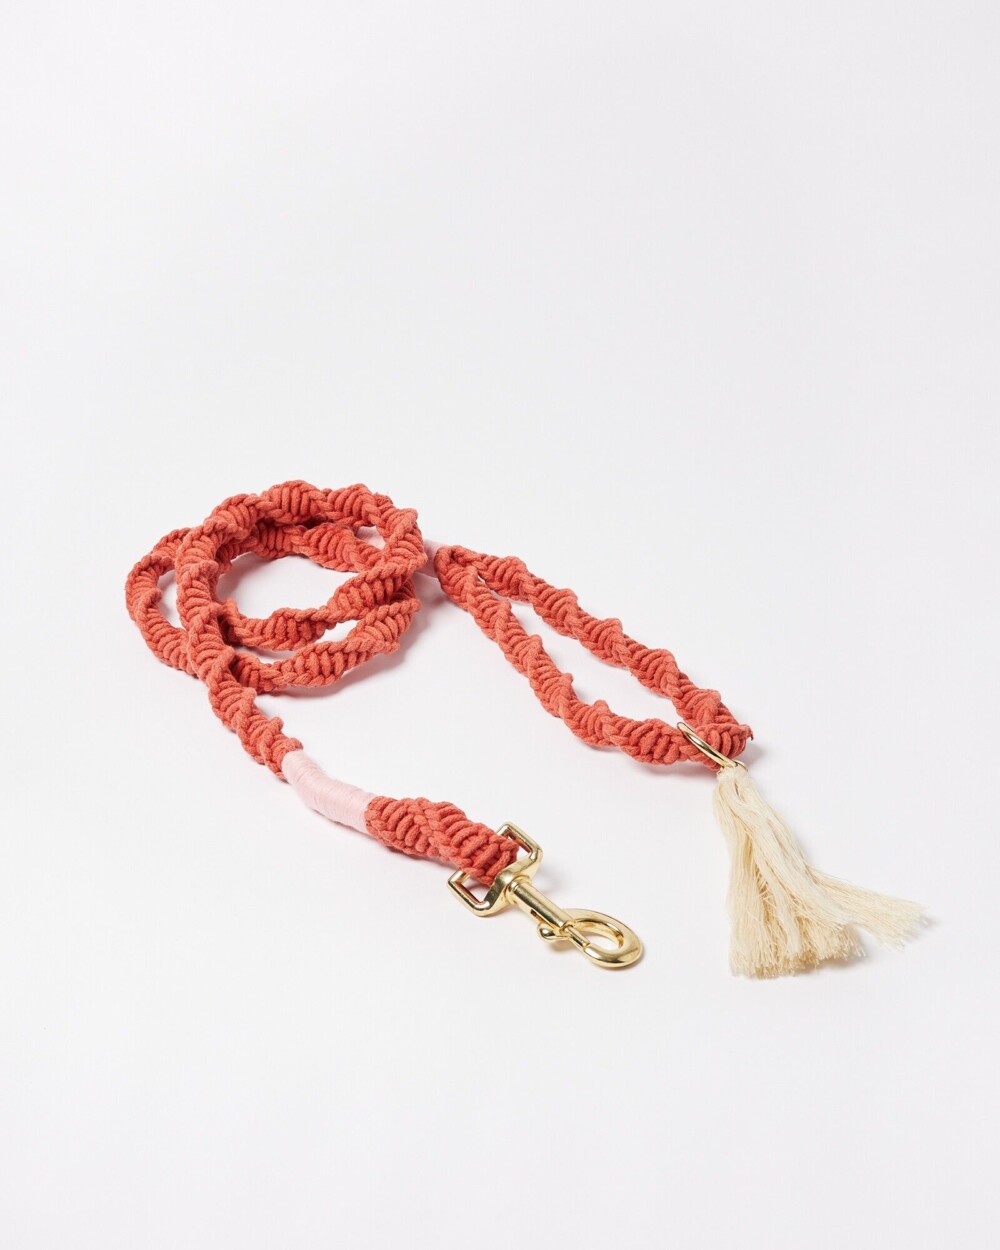 a pinkish, sunset coloured twister rope lead with a tassel and gold detail glasp, shown against a white background